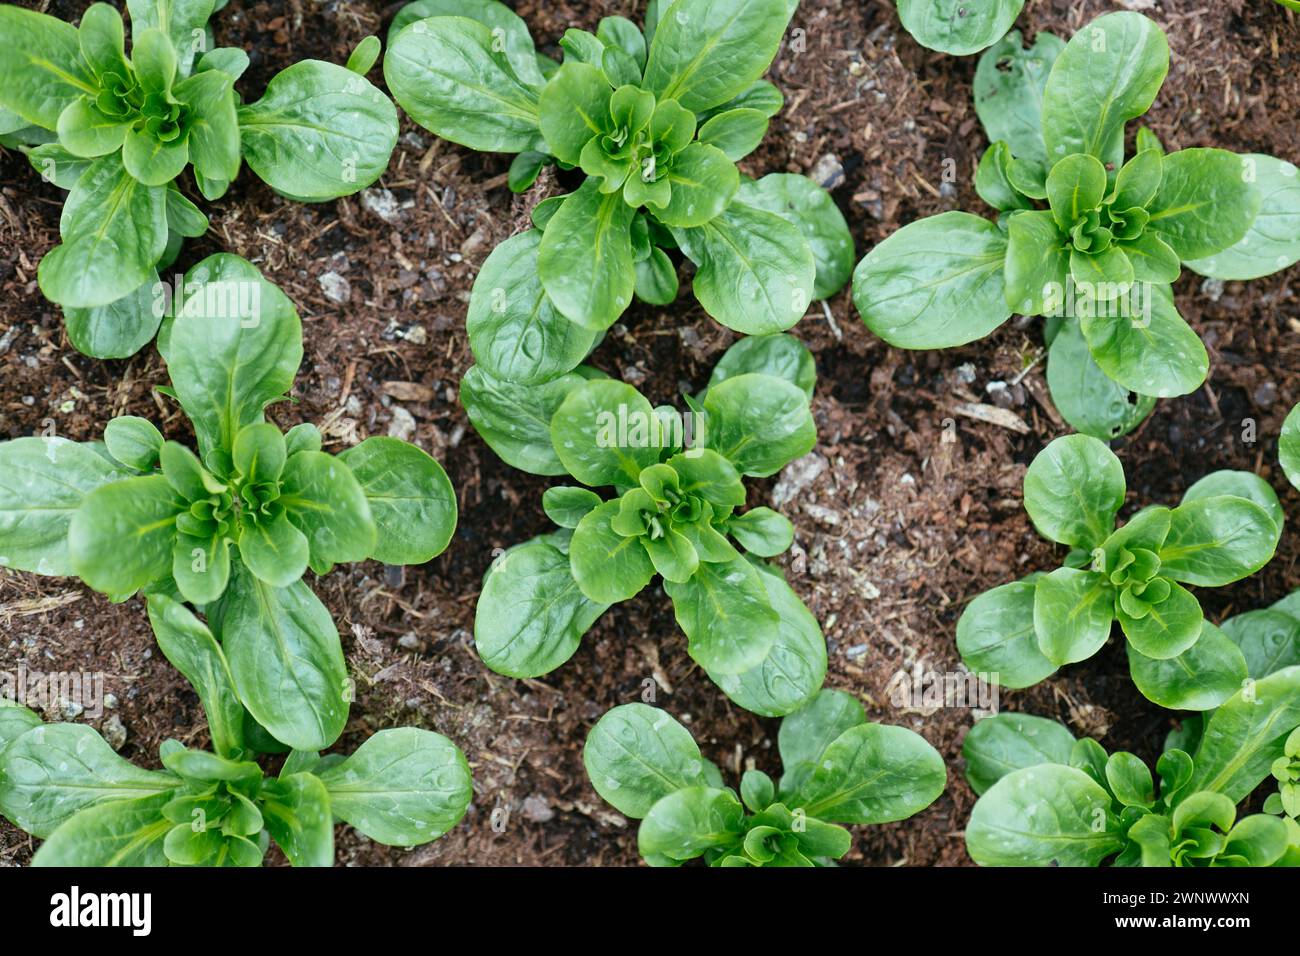 Cornsalad (Valerianella locusta) growing at the end of the winter in Germany Stock Photo